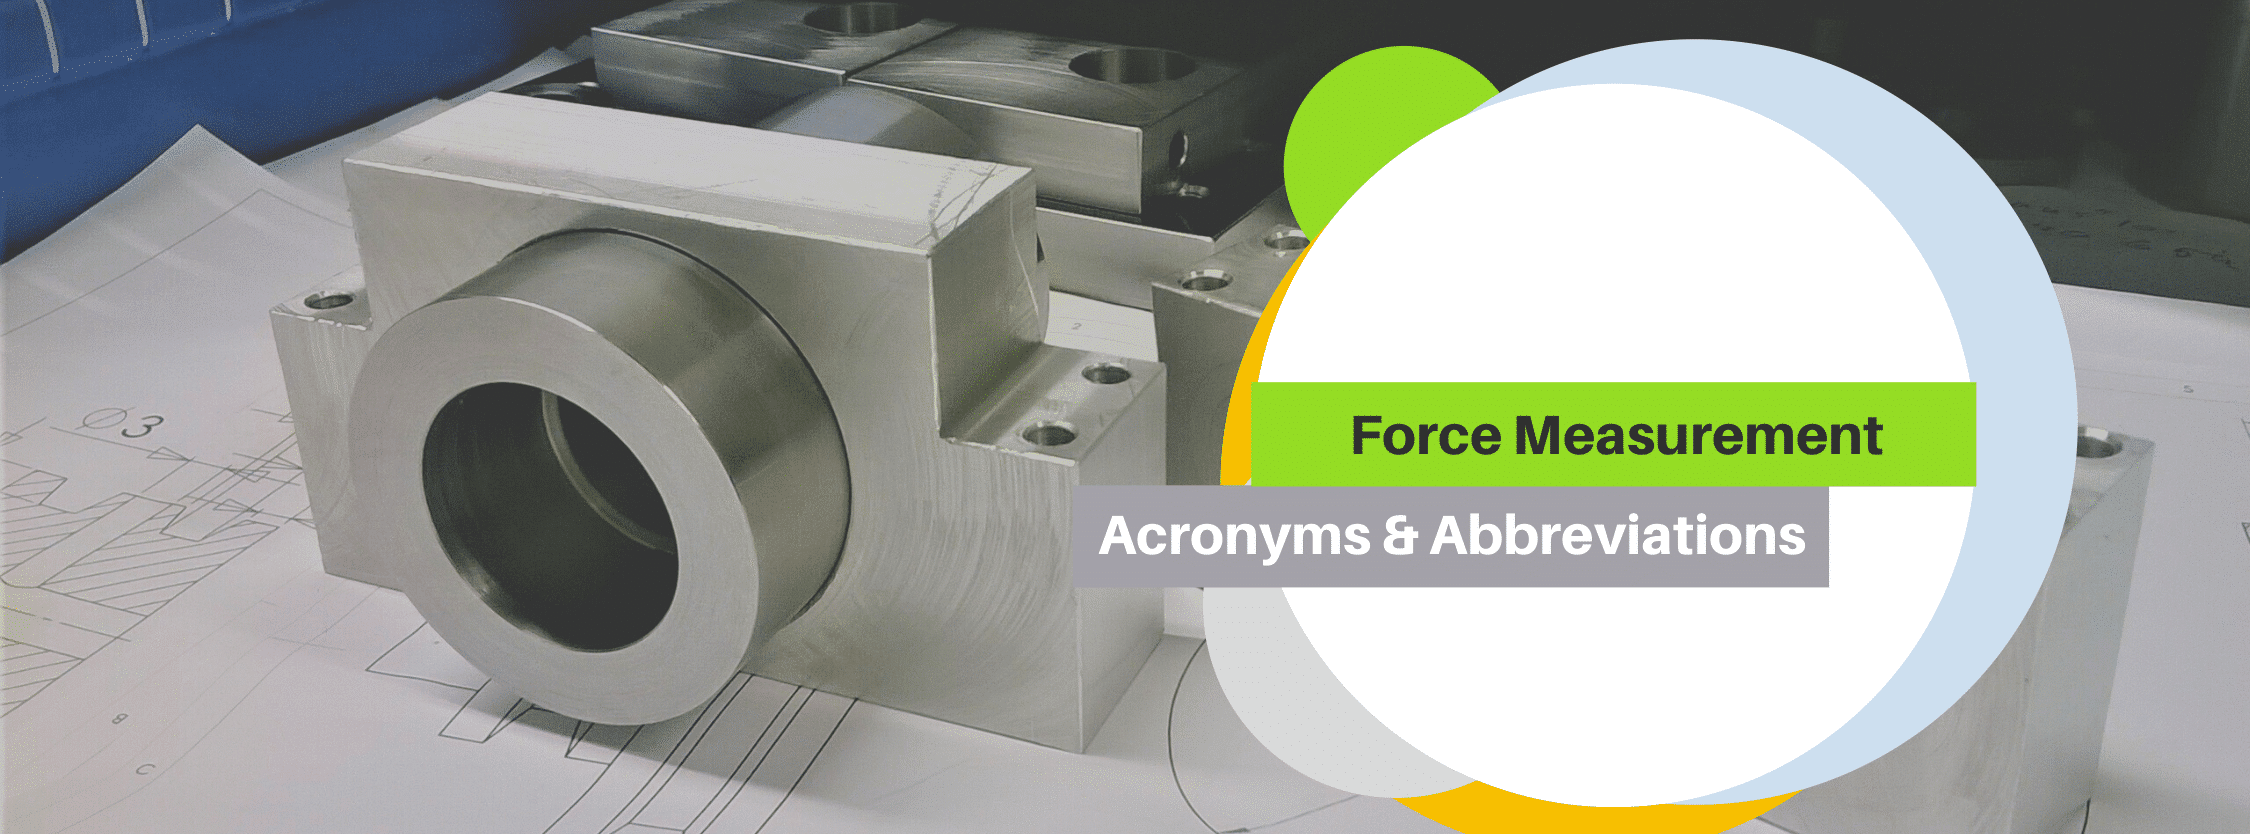 banner image for the article Force Measurement Acronyms and Abbreviations